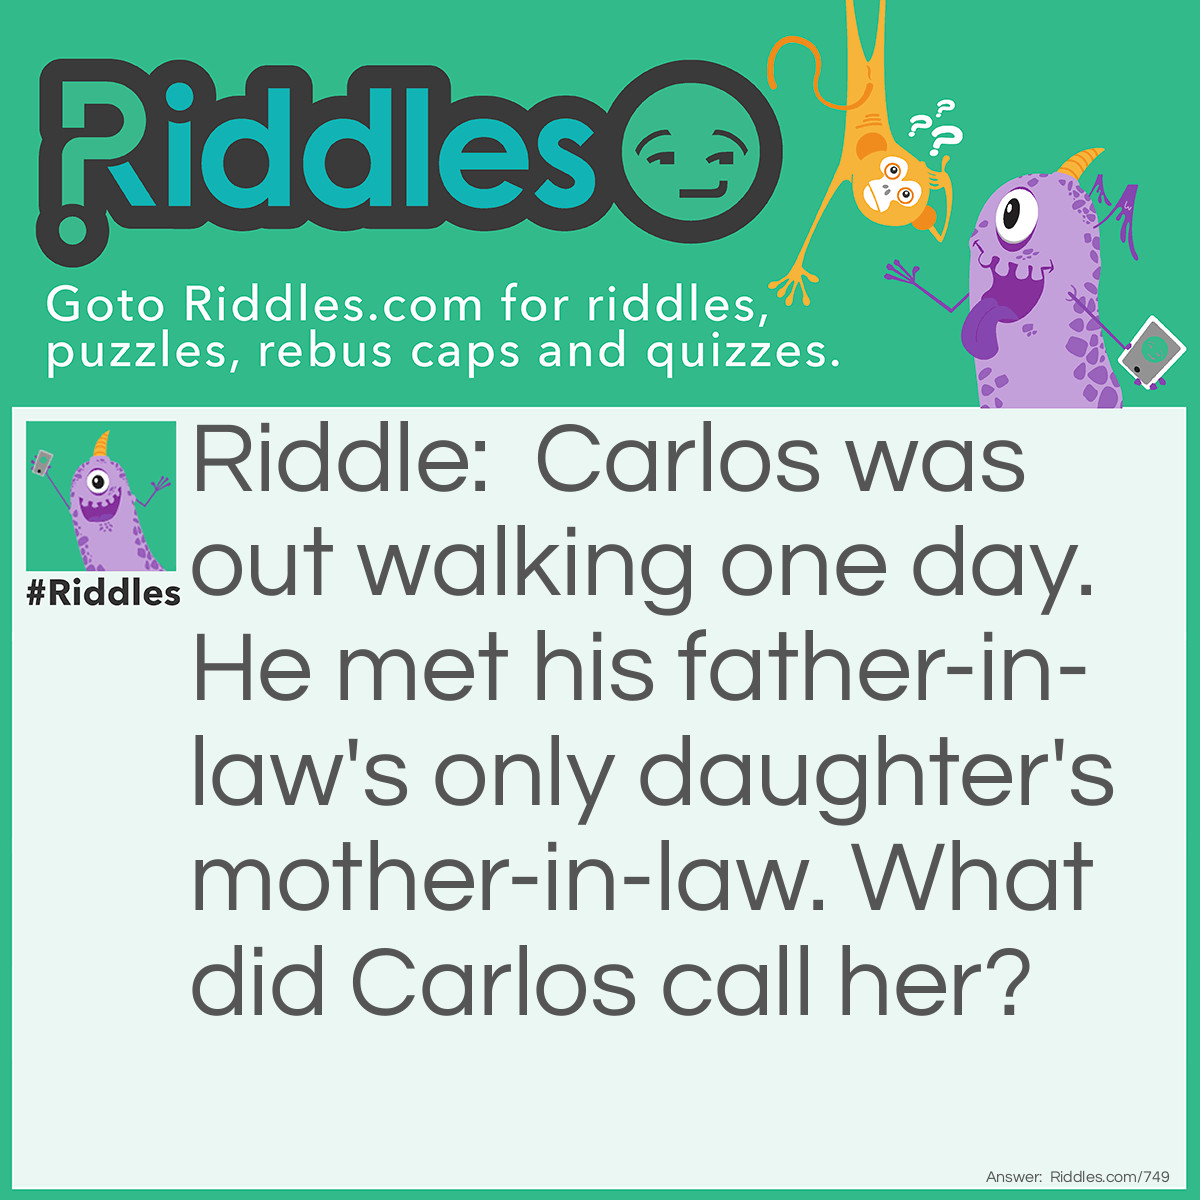 Riddle: Carlos was out walking one day. He met his father-in-law's only daughter's mother-in-law. What did Carlos call her? Answer: He called her Mom!